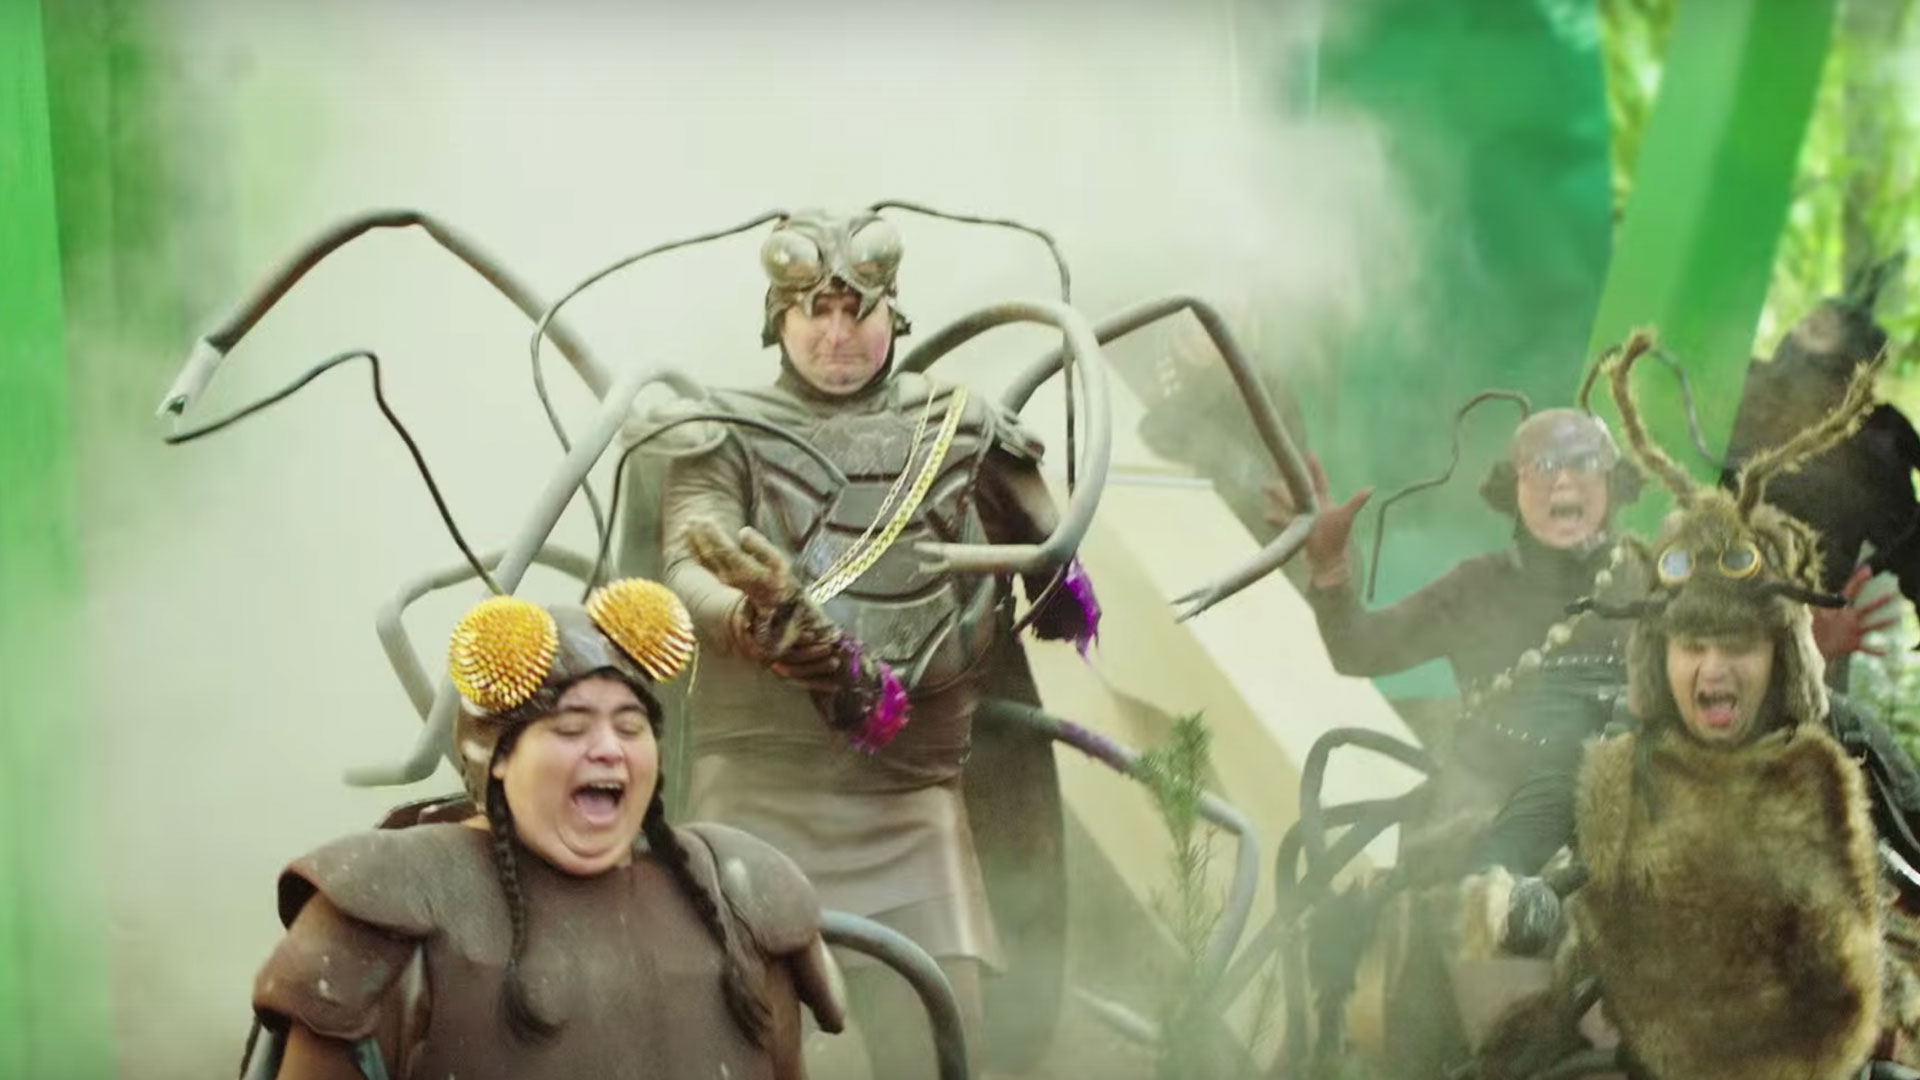 Rodgers Townsend Imagines a Bug Apocalypse in Spectracide Spot